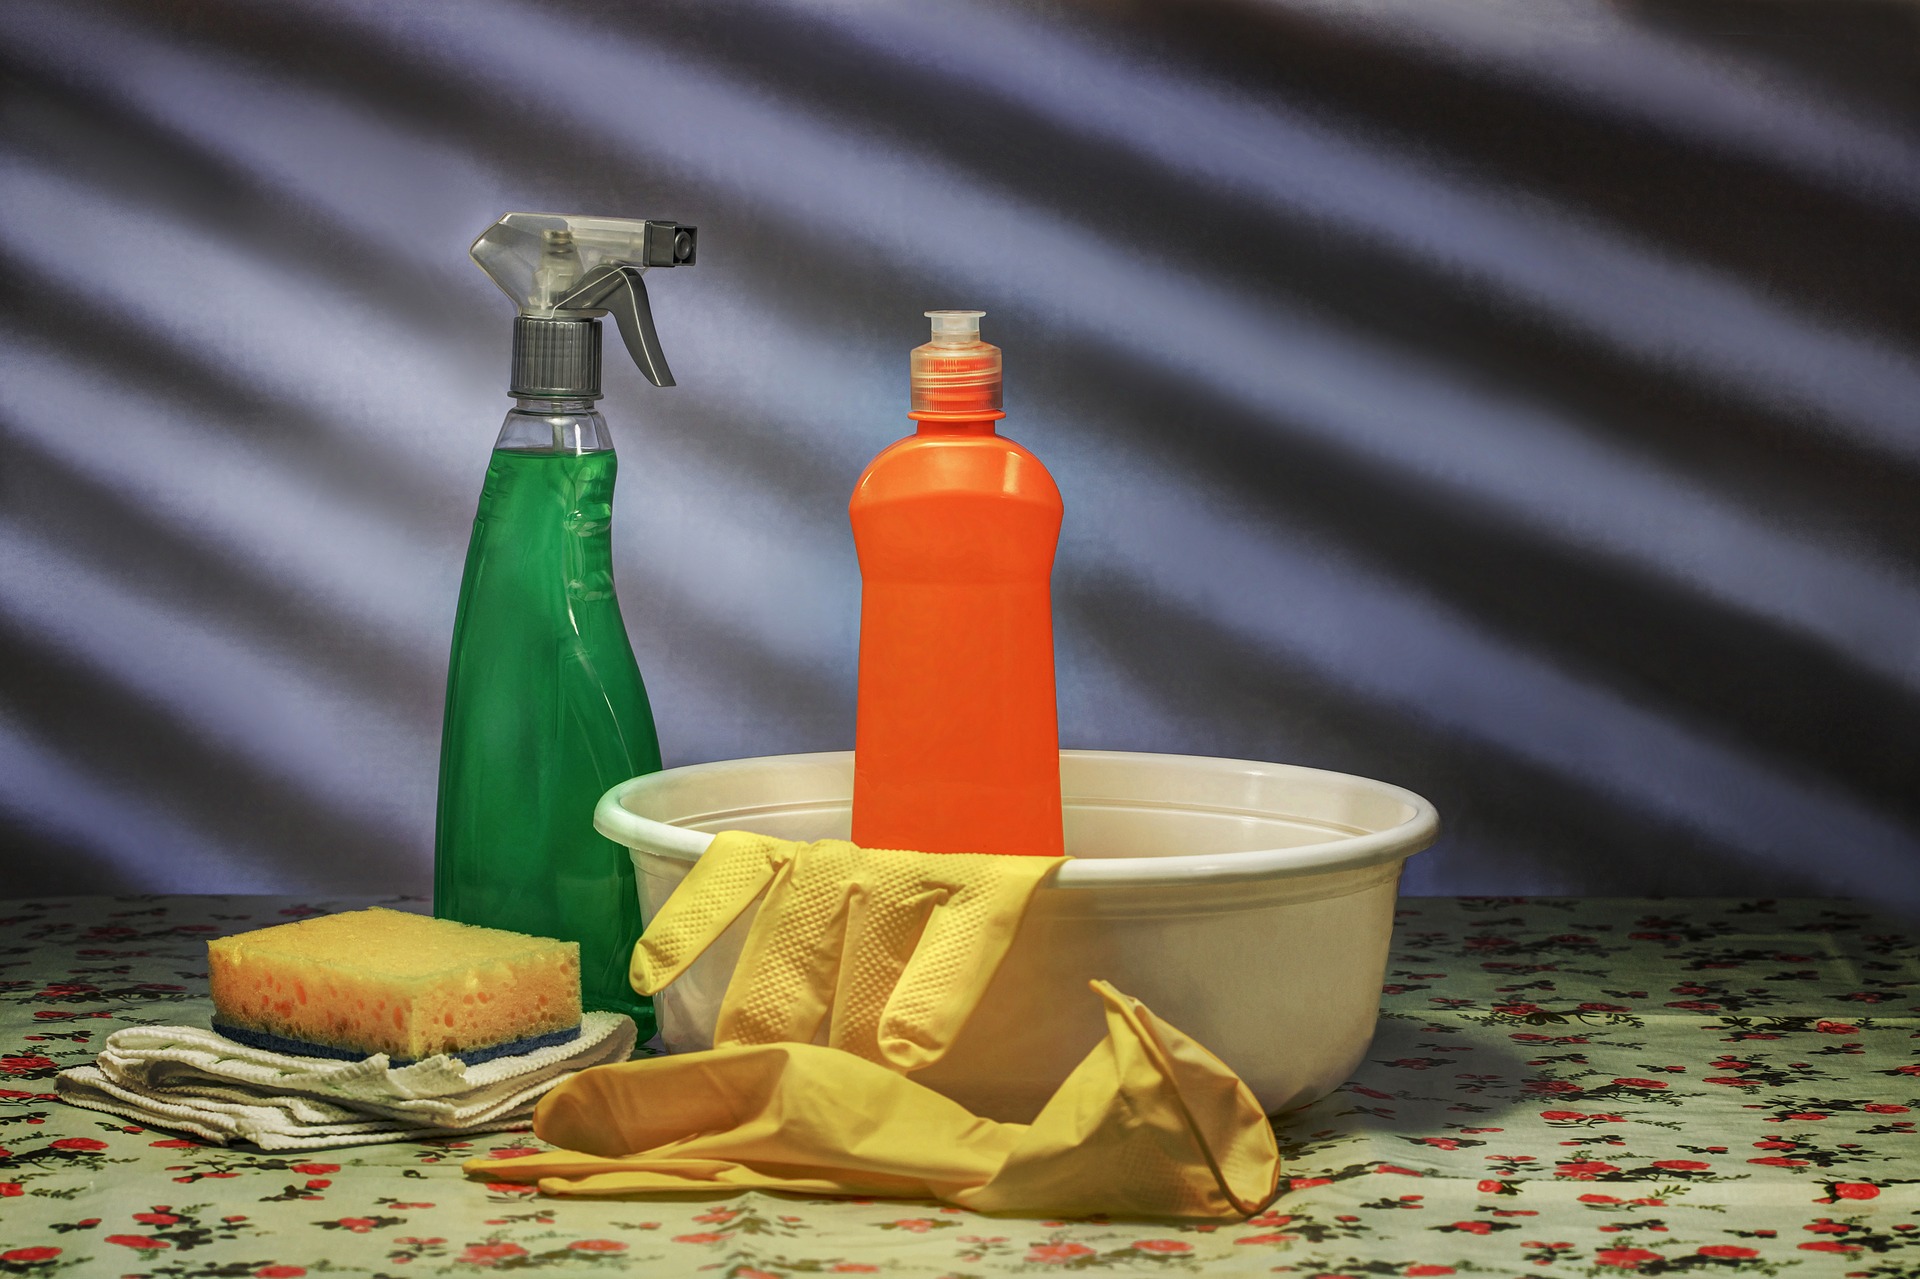 Cases of poisoning by household items